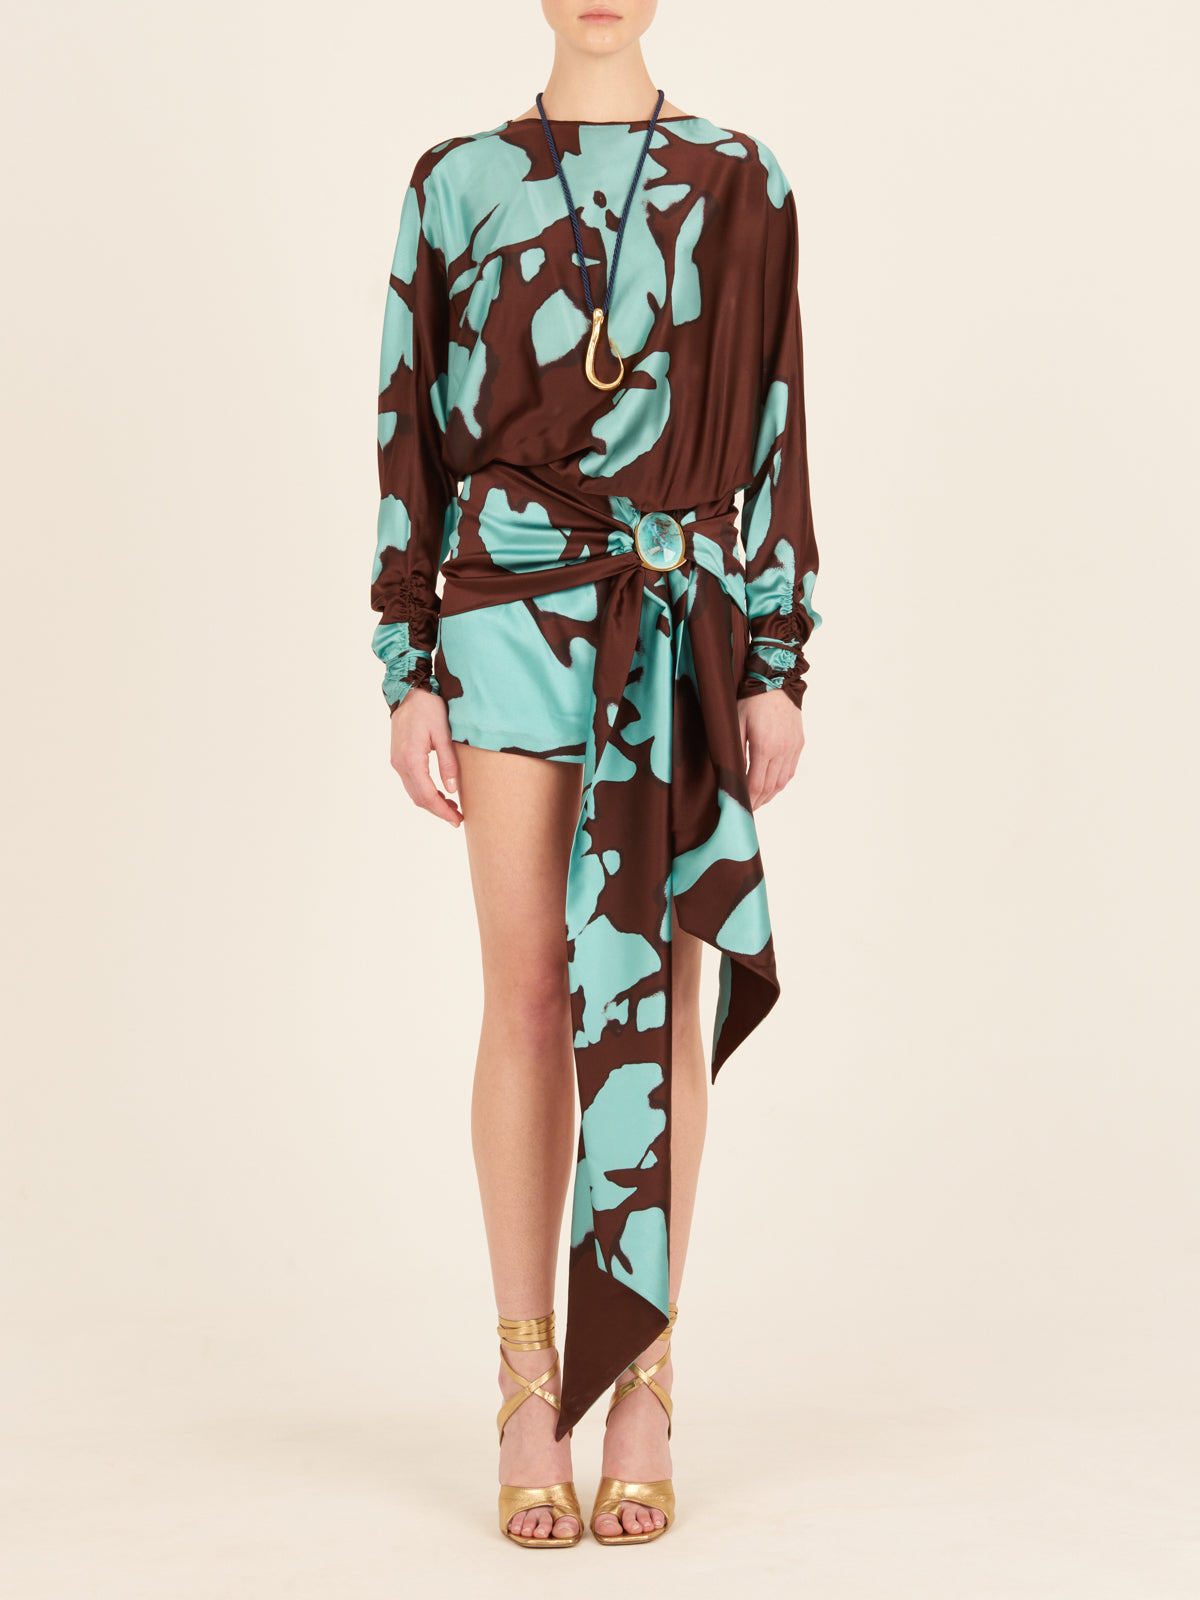 A Mallorca Dress Celeste Cacao with a black and blue floral print.